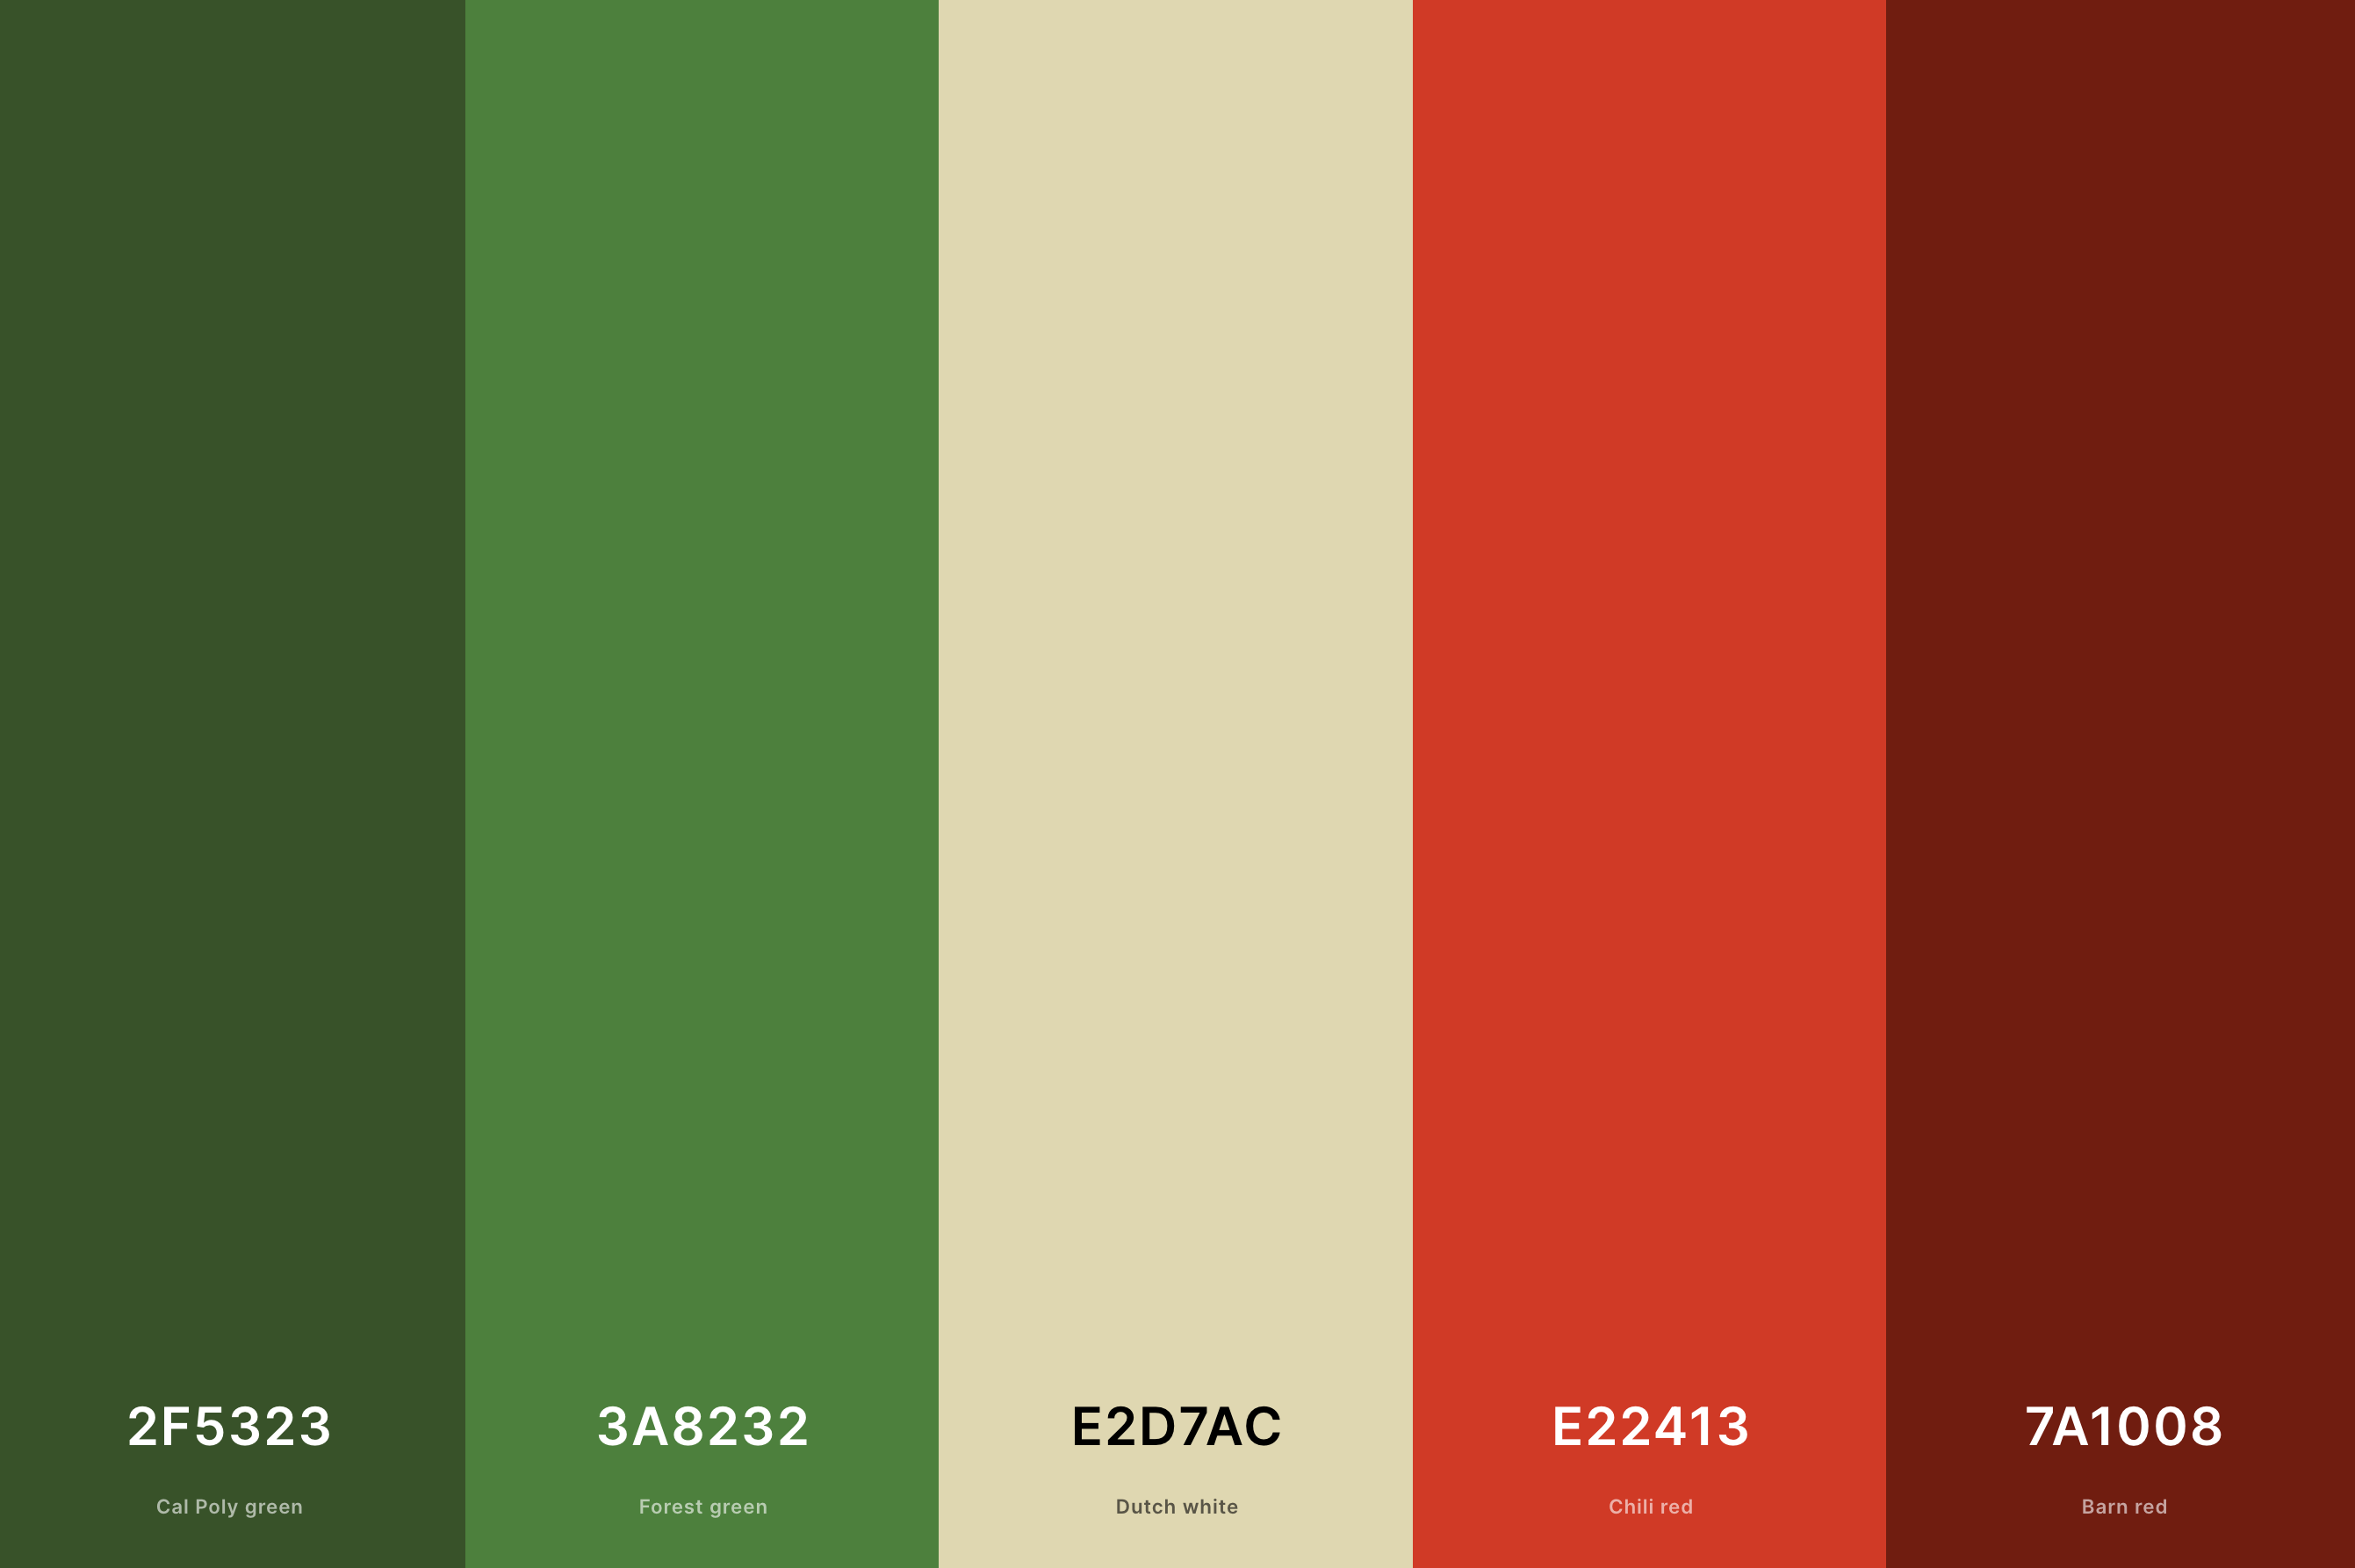 8. Retro Christmas Color Palette Color Palette with Cal Poly Green (Hex #2F5323) + Forest Green (Hex #3A8232) + Dutch White (Hex #E2D7AC) + Chili Red (Hex #E22413) + Barn Red (Hex #7A1008) Color Palette with Hex Codes